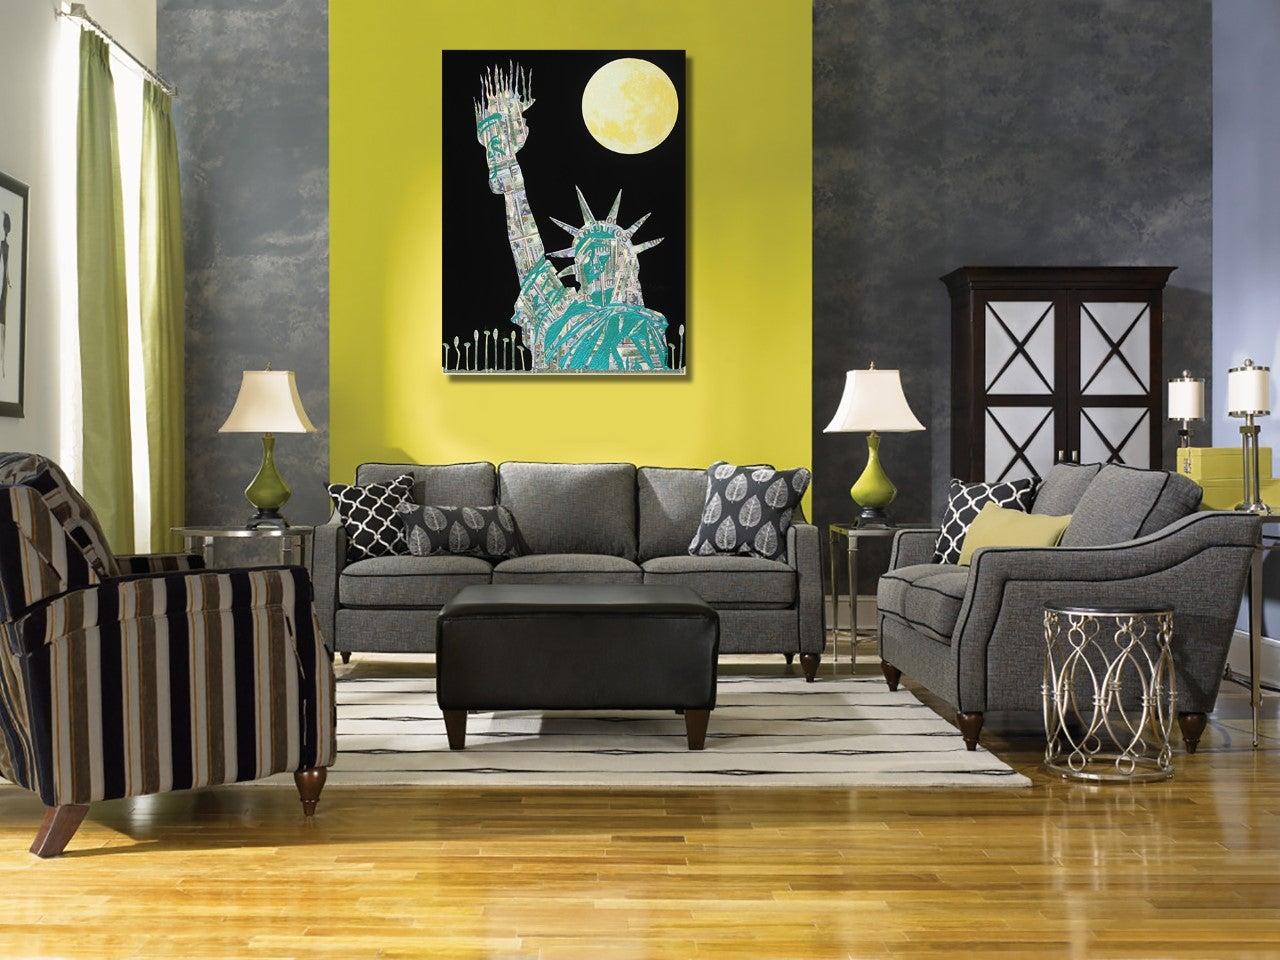 Lovable Liberty II (Limited Edition Print) For Sale 1